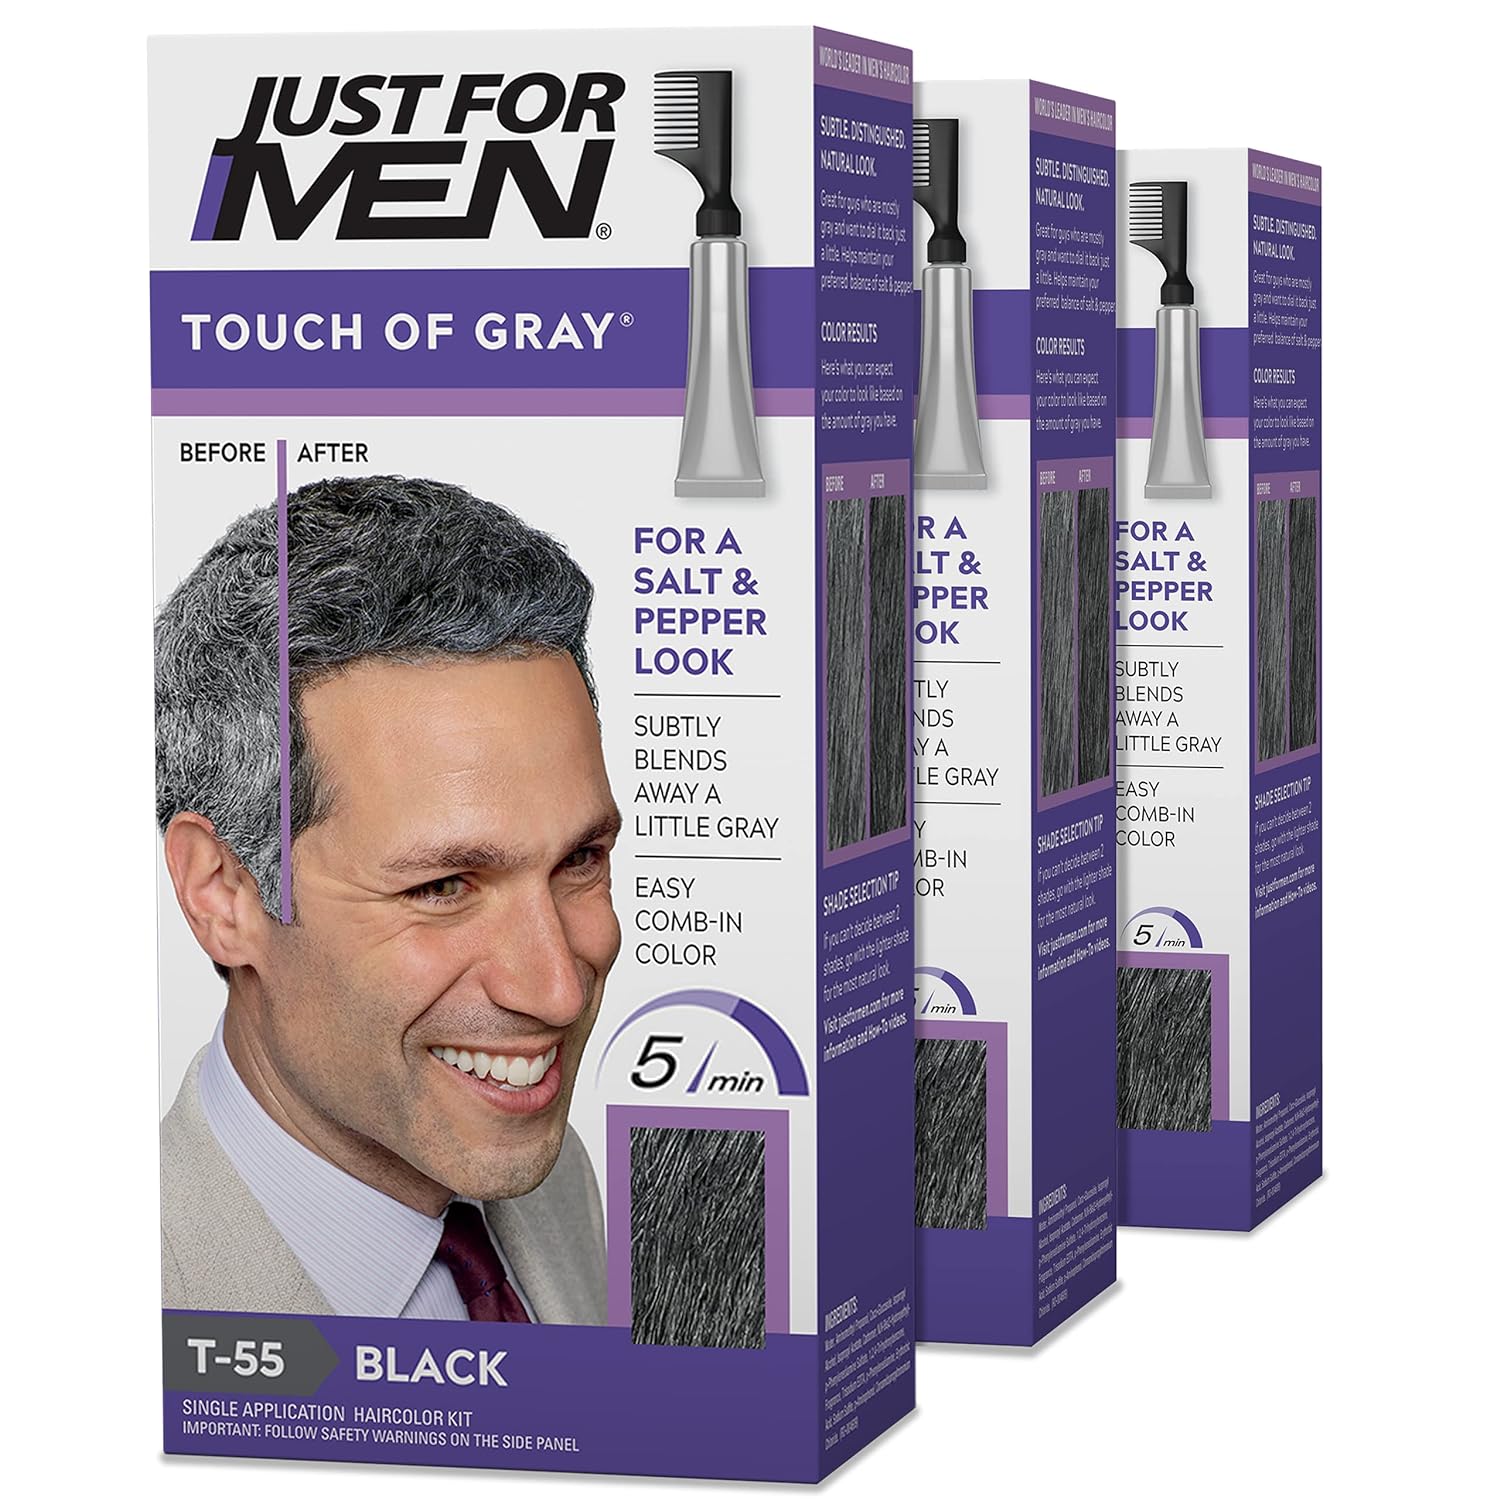 Just For Men Touch of Gray, Gray Hair Coloring Kit for 